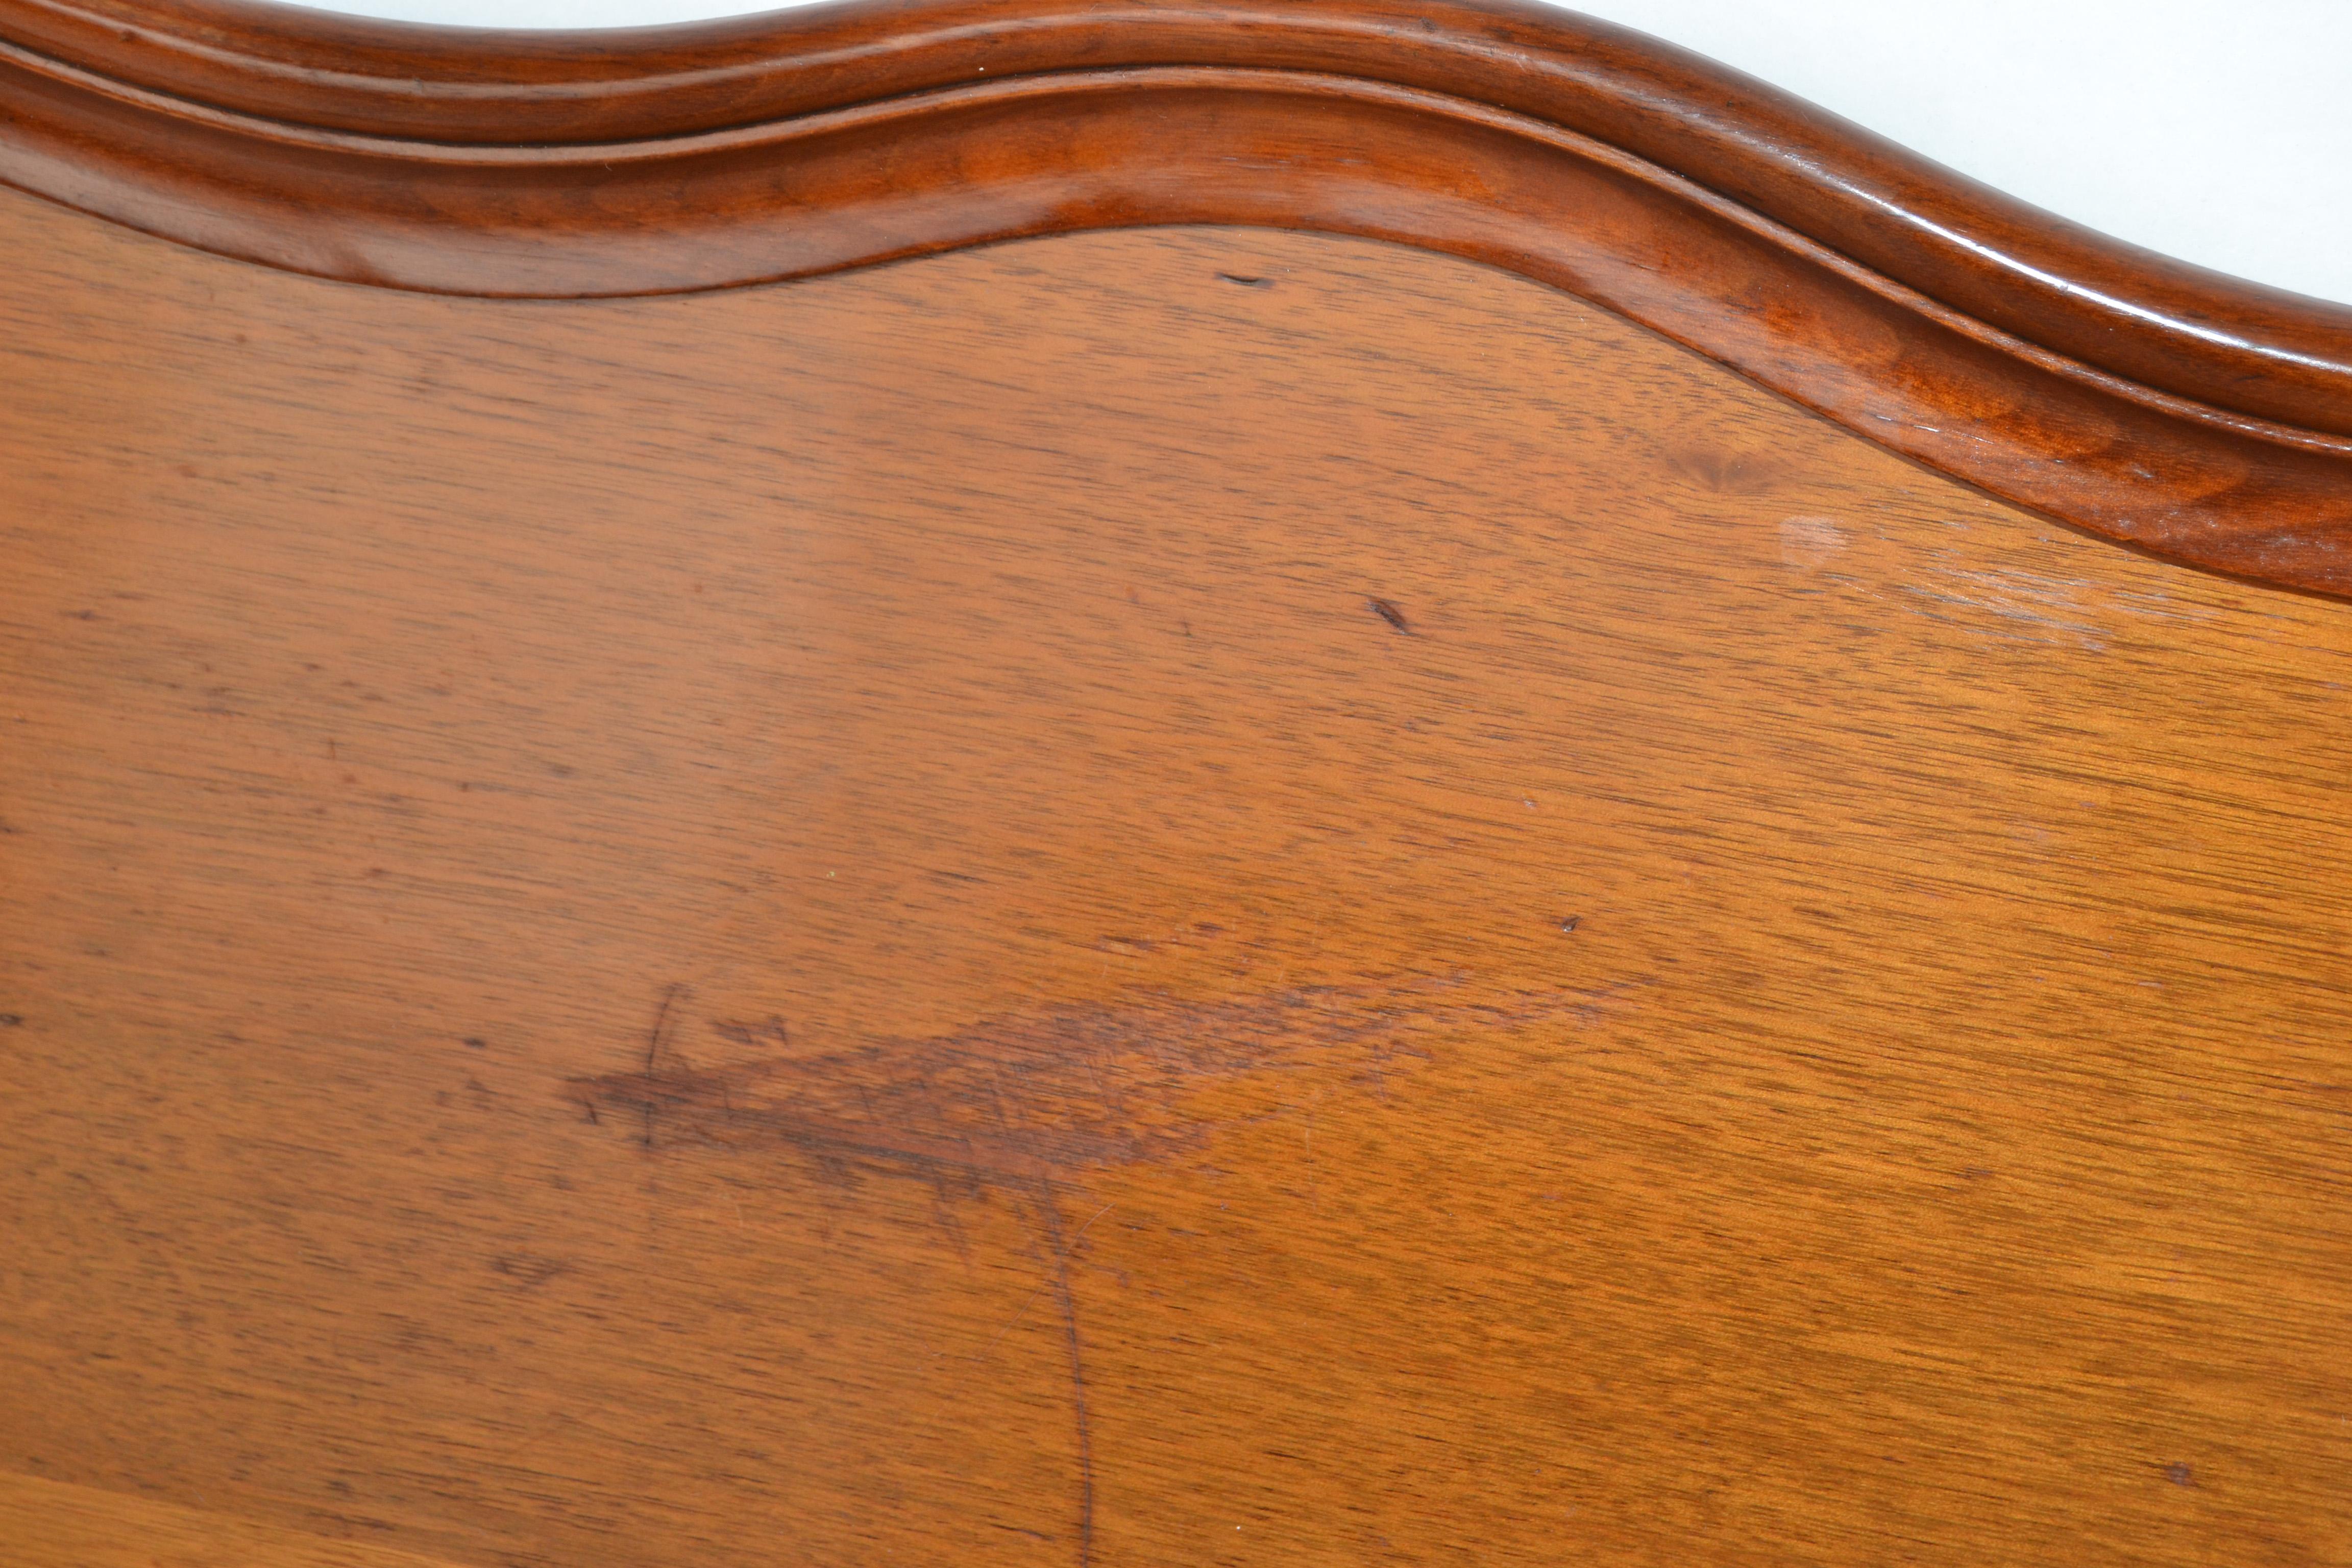 Hollywood Regency Large Rustic Hand Carved Solid Wood Serving Tray Platter, 1975 For Sale 6